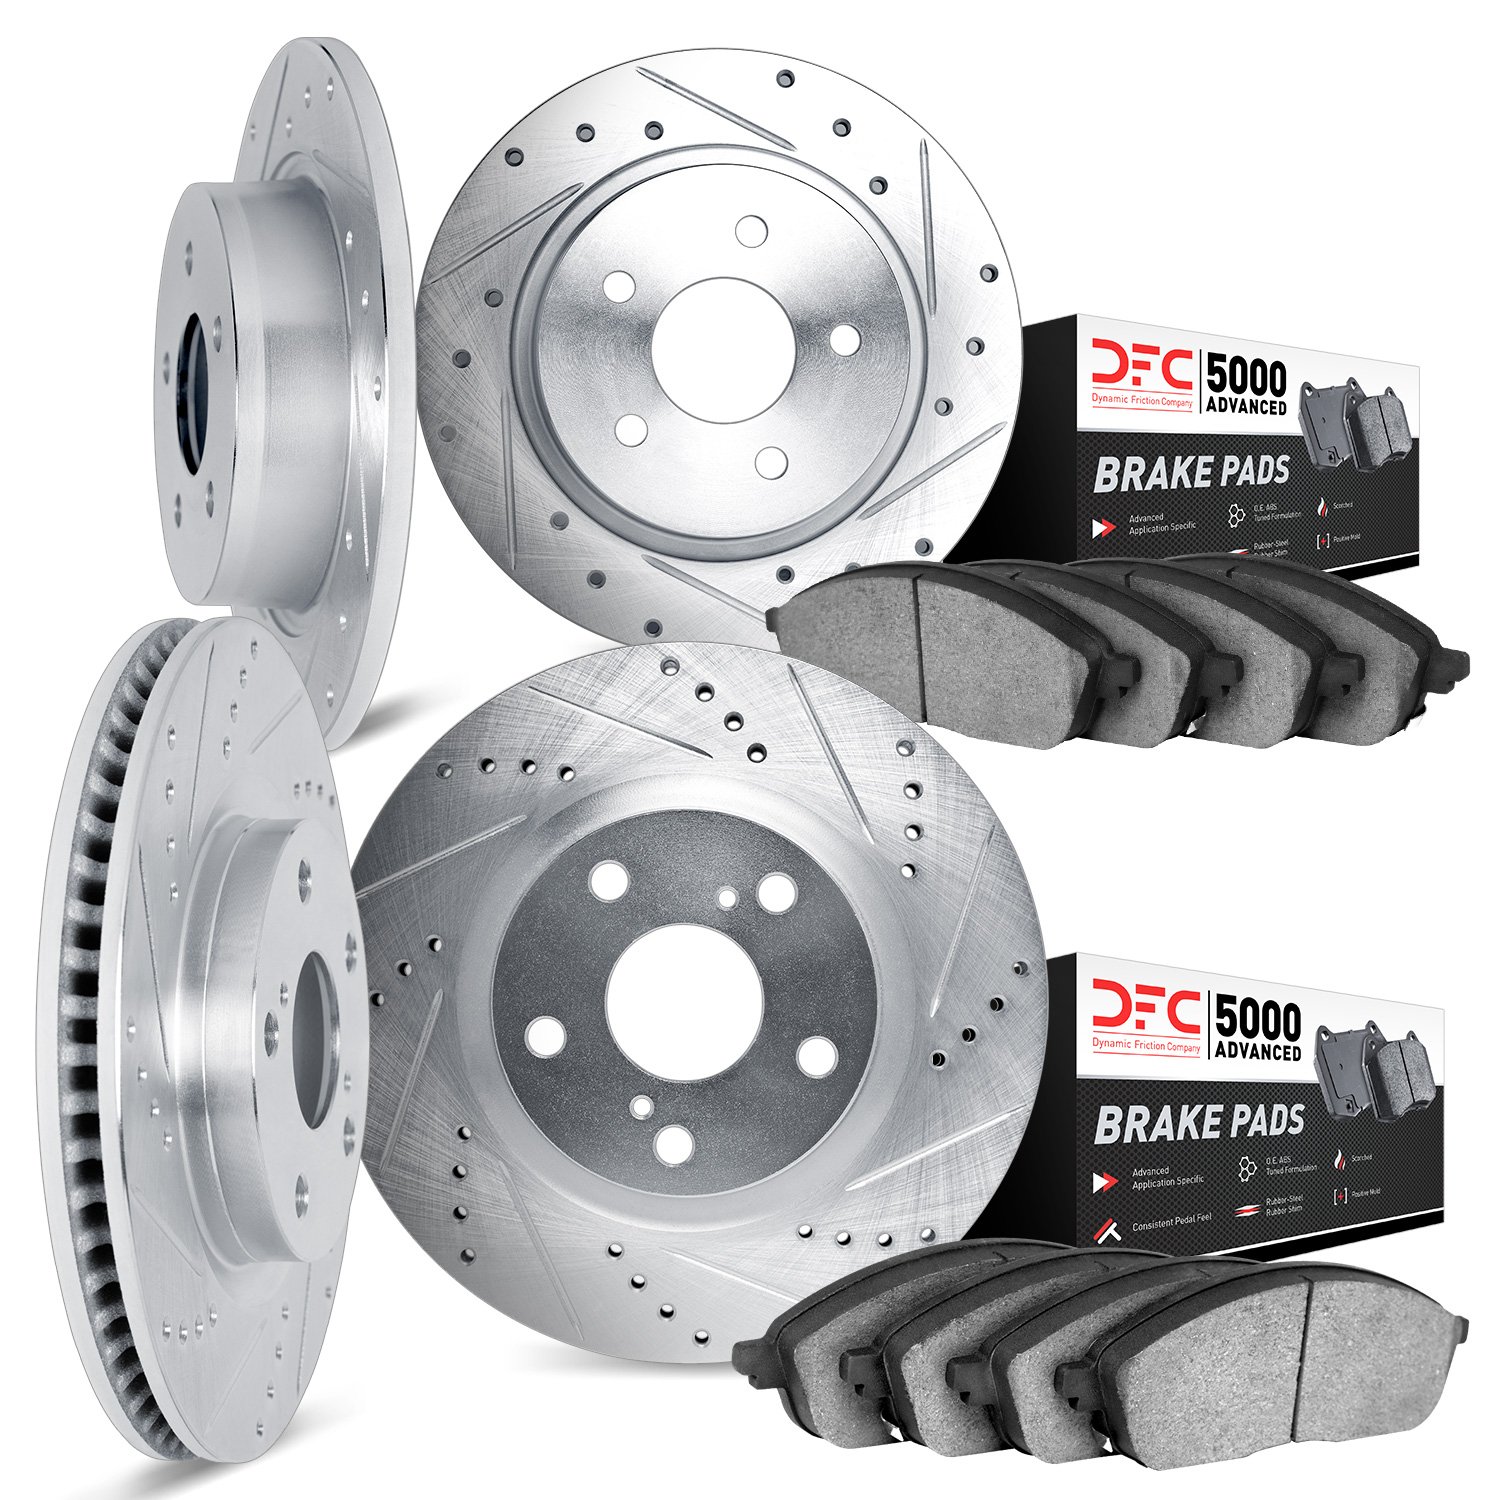 7504-56028 Drilled/Slotted Brake Rotors w/5000 Advanced Brake Pads Kit [Silver], 1998-2002 Ford/Lincoln/Mercury/Mazda, Position: